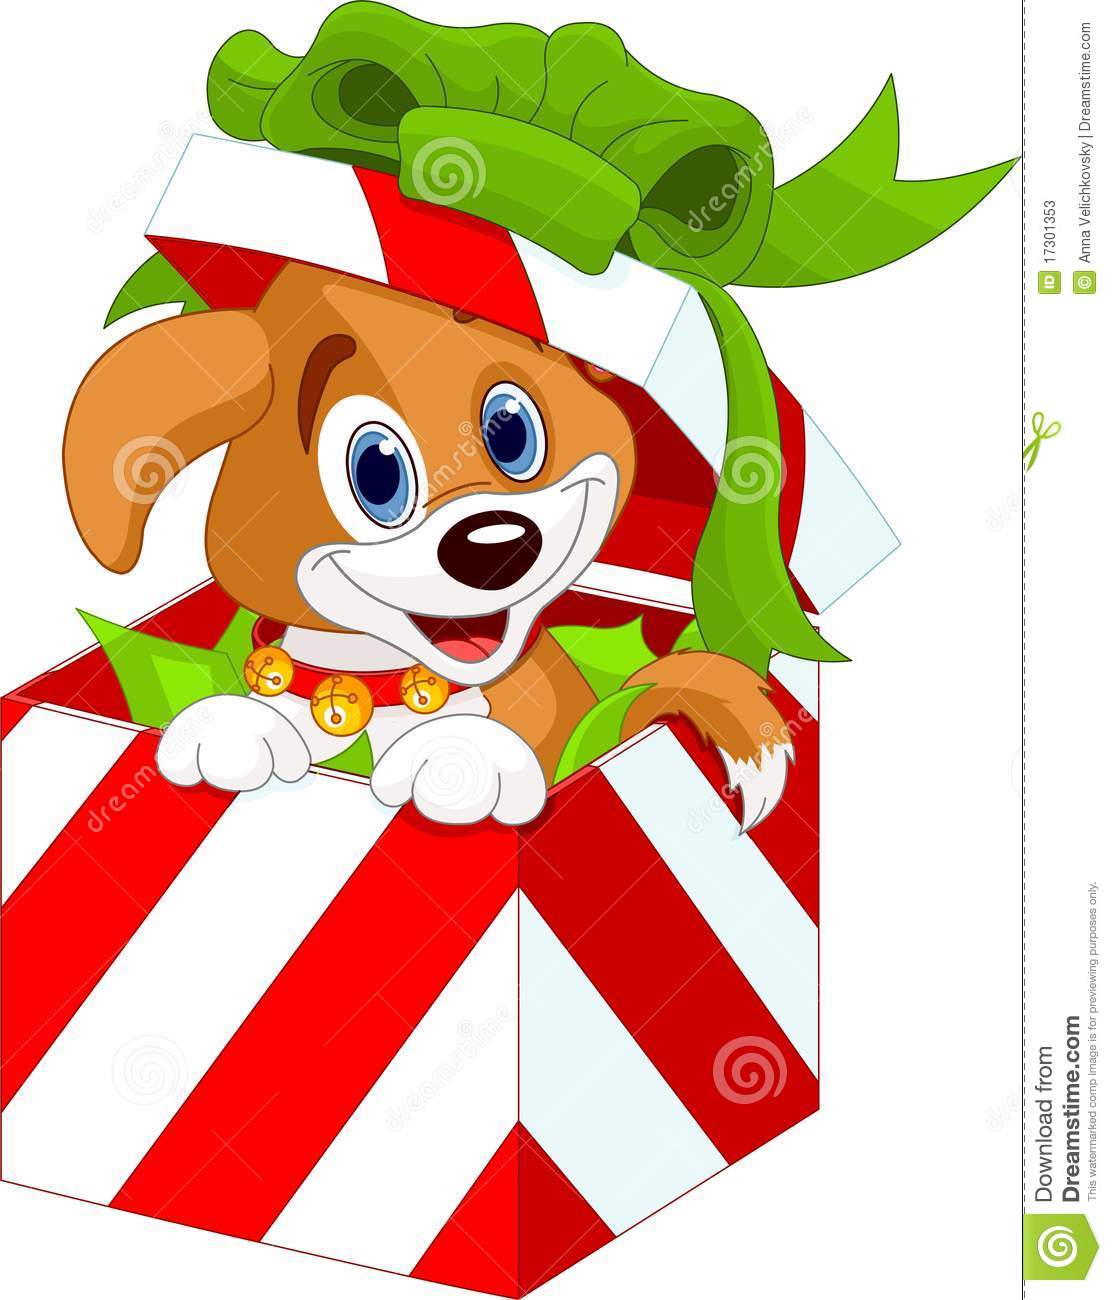 Puppy In A Christmas Gift Box Stock Photos   Image  17301353